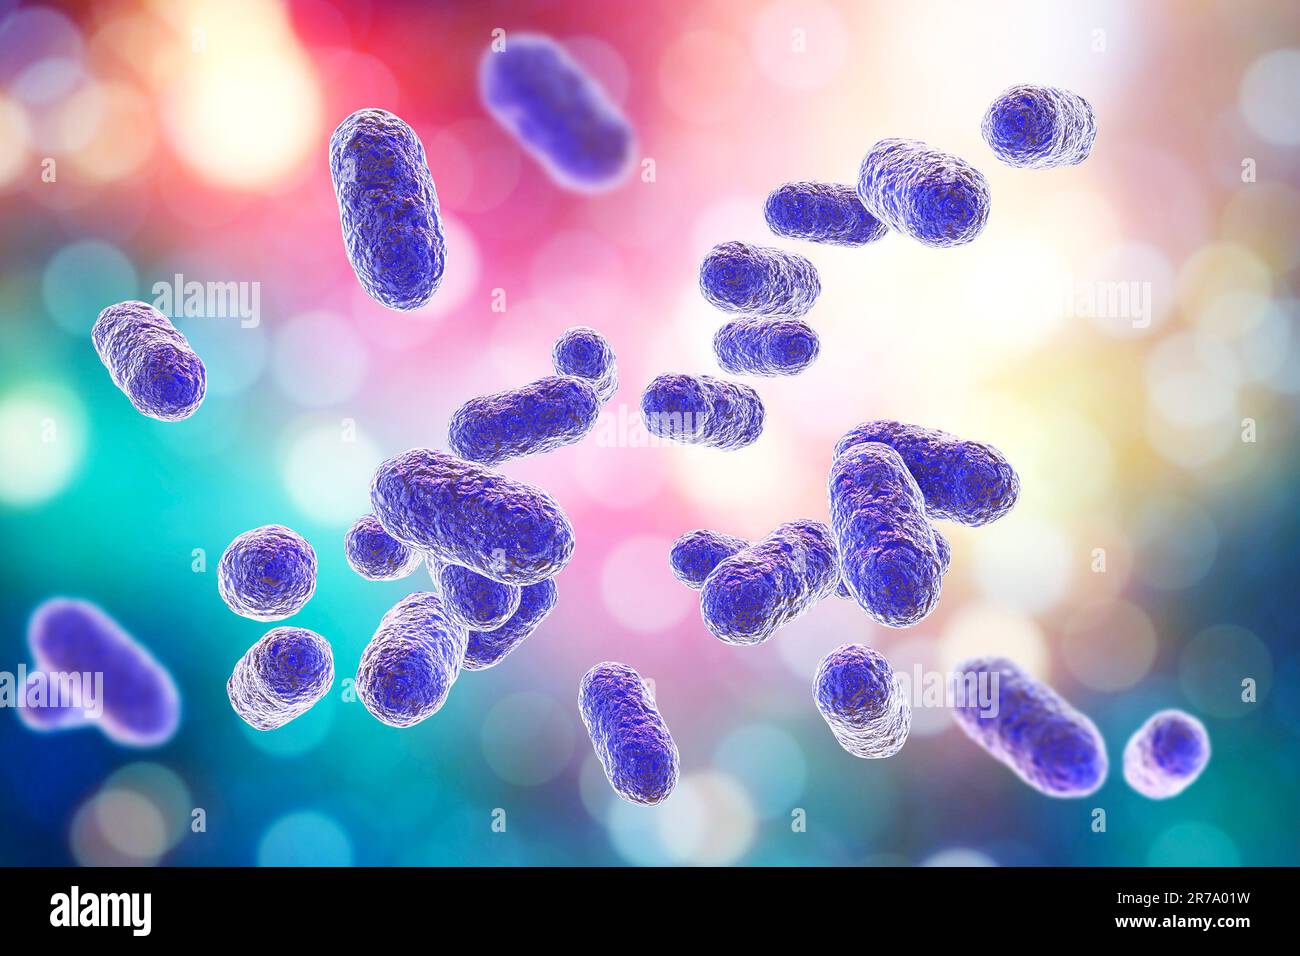 Porphyromonas gingivalis bacteria, 3D illustration. Anaerobic bacteria that cause periodontal disease, bacterial vaginosis, are probably associated wi Stock Photo